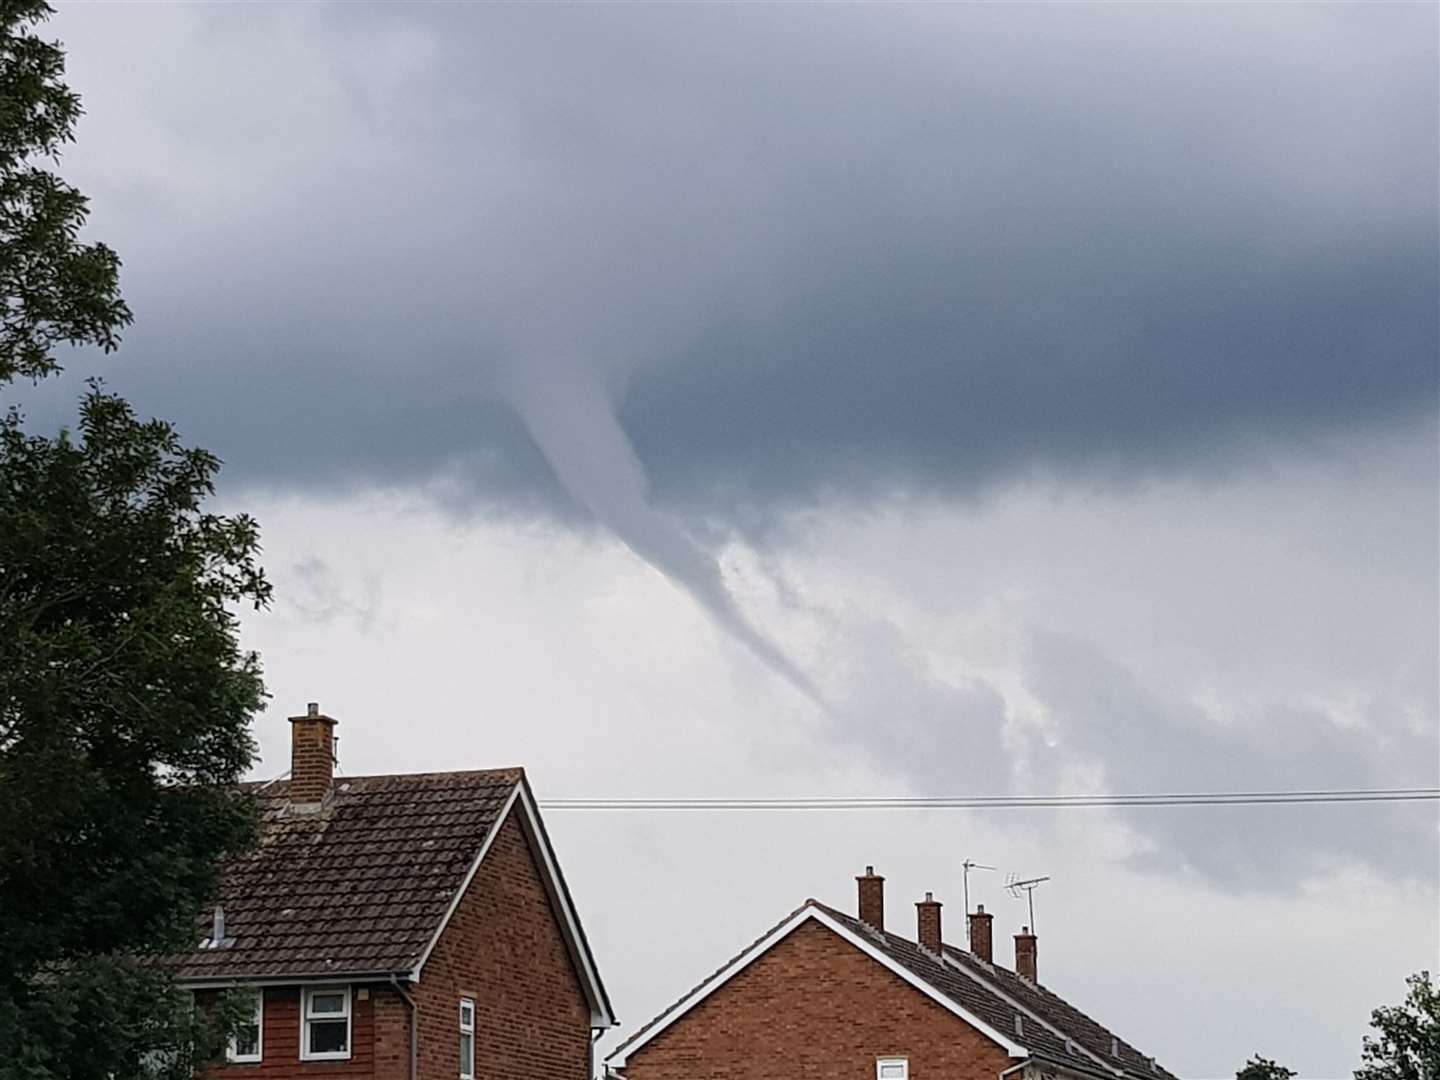 Mason Maclean took this photo of a funnel cloud over the Sittingbourne area. Picture: Mason Maclean